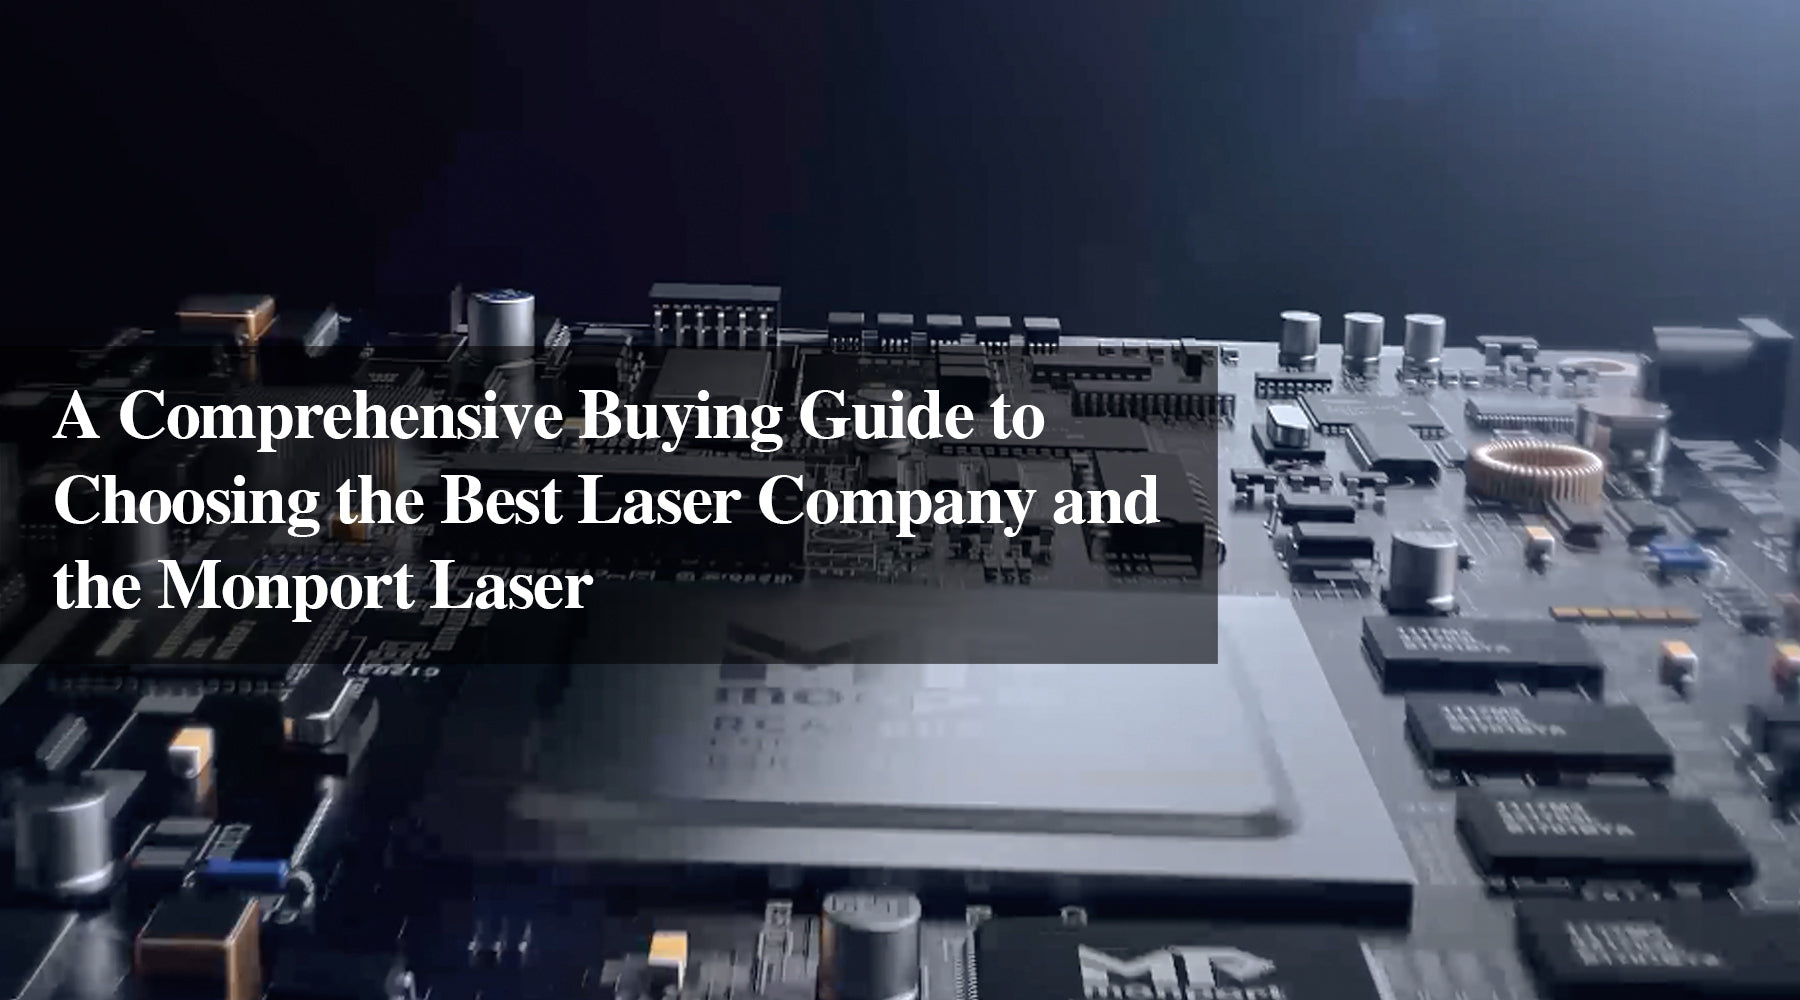 A Comprehensive Buying Guide to Choosing the Best Laser Company and the Monport Laser